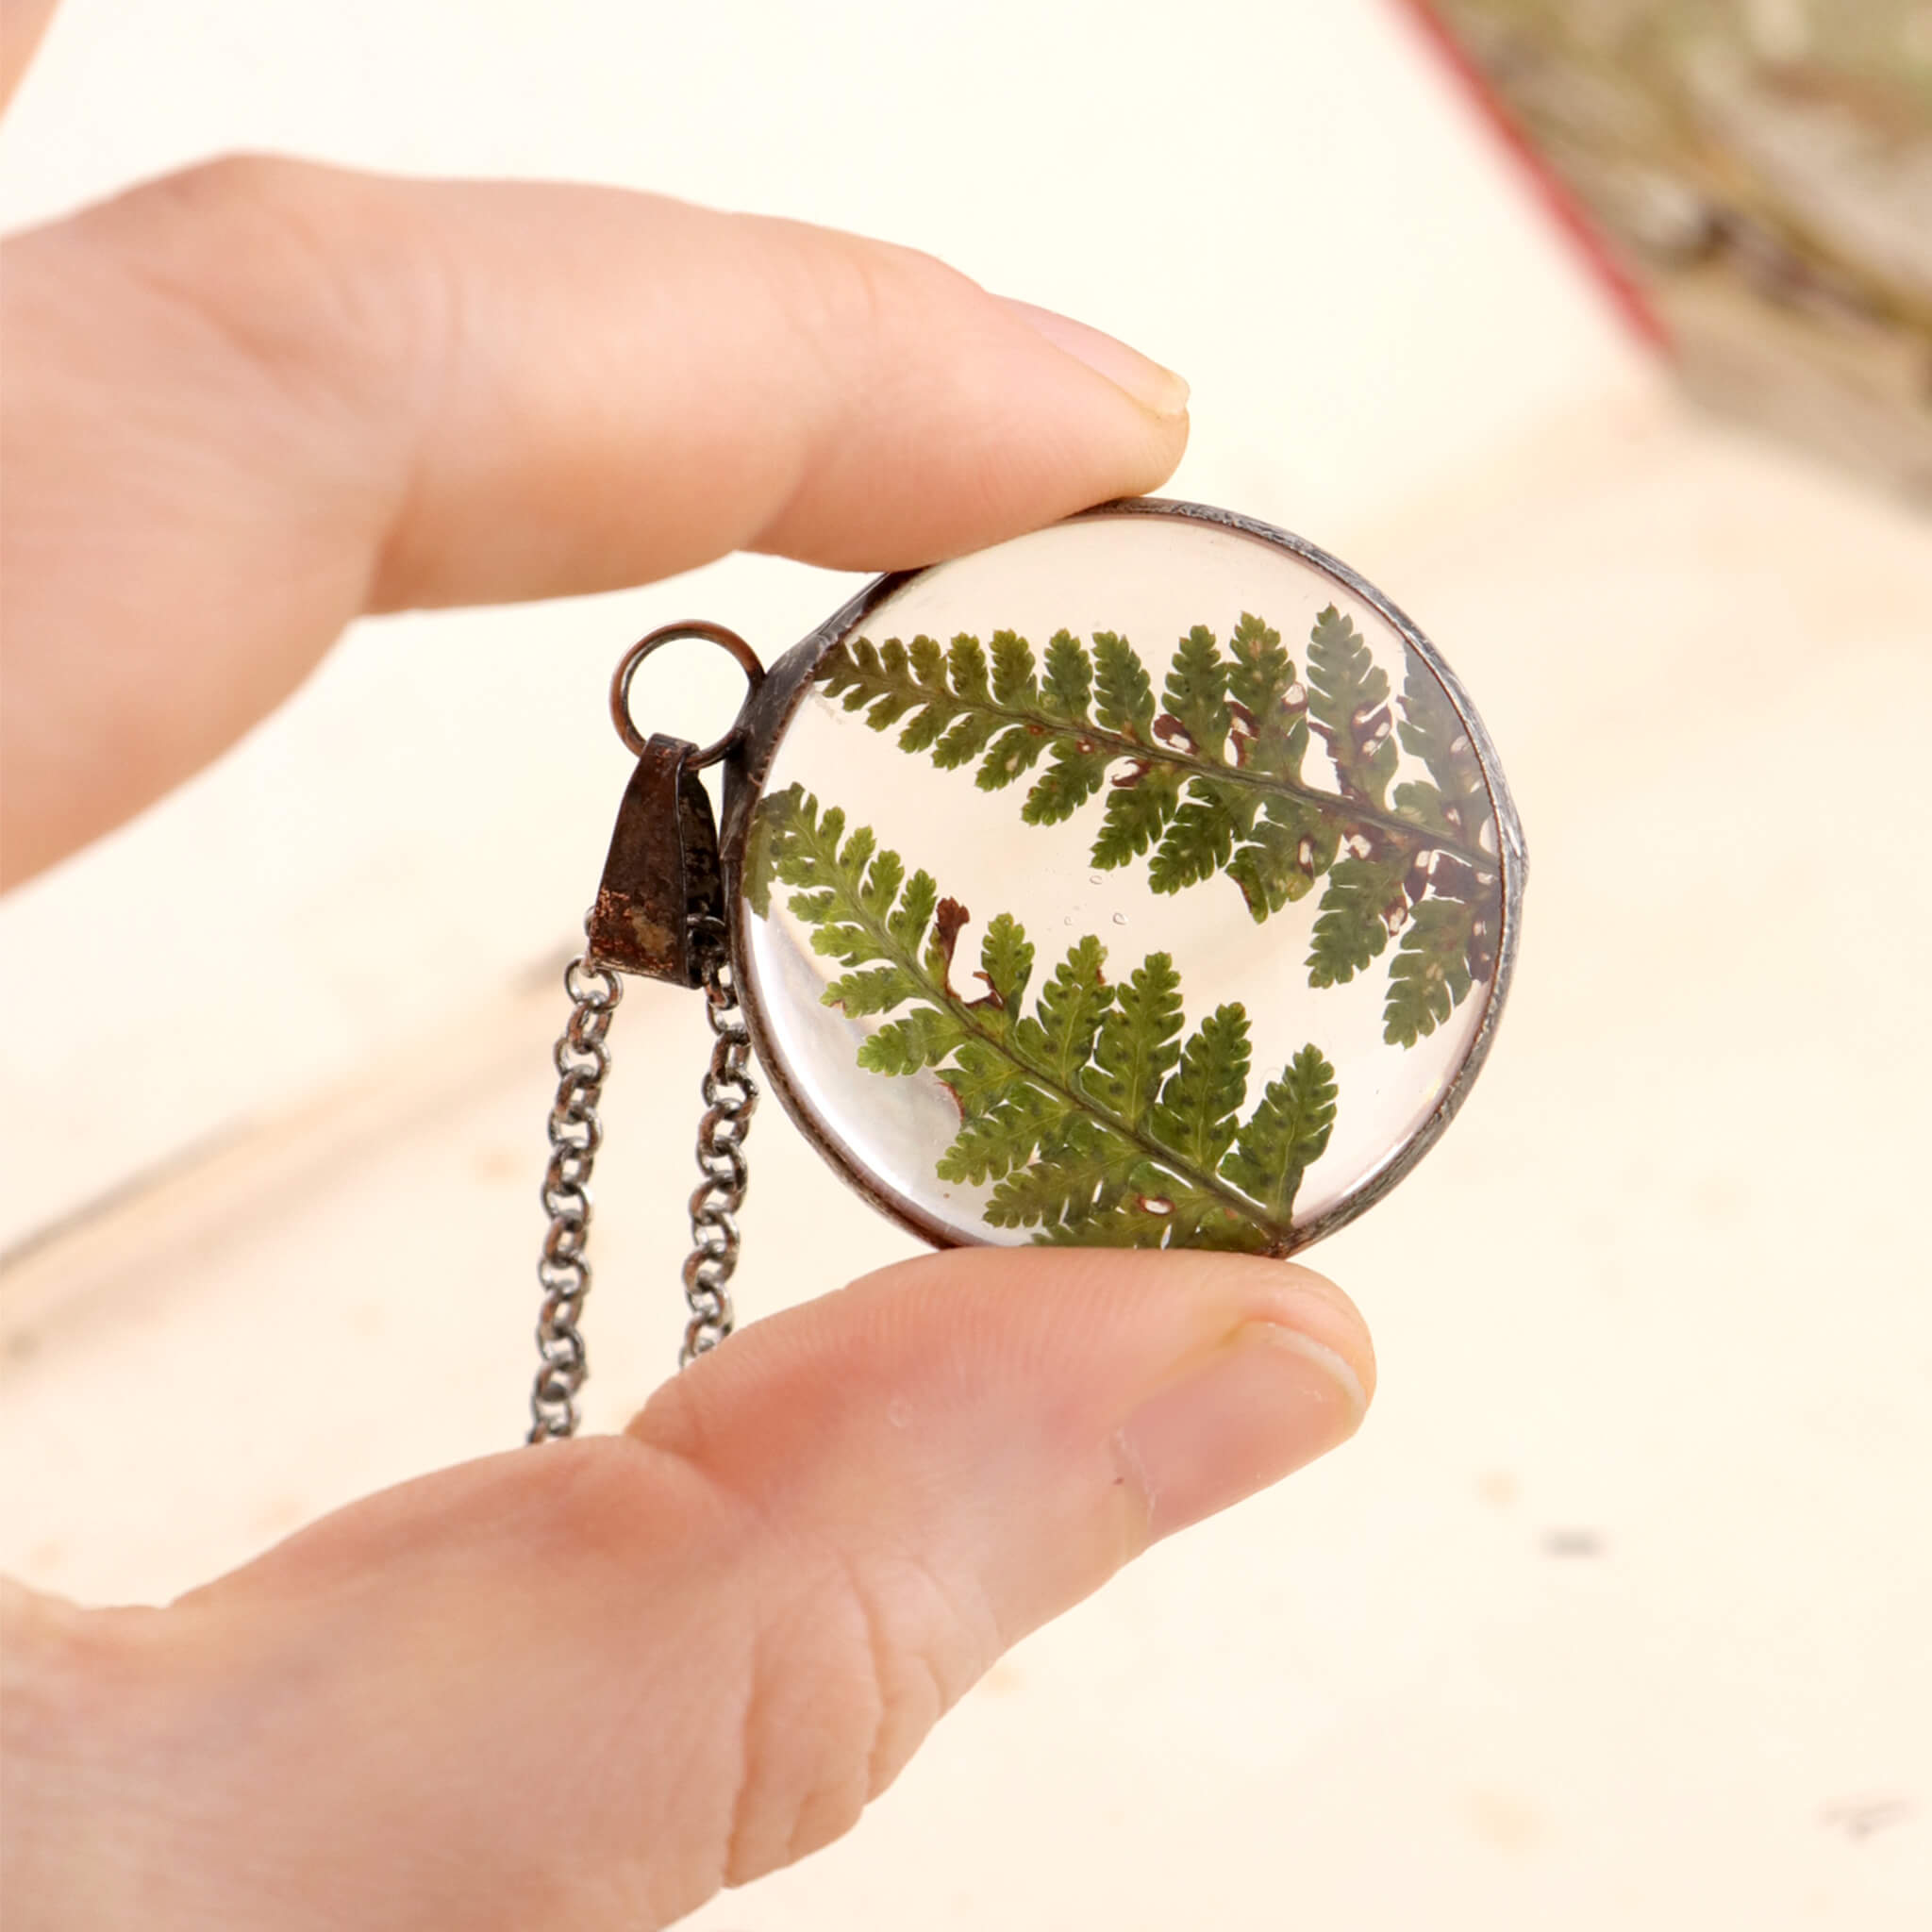 Hand holding Round necklace with two dry ferns